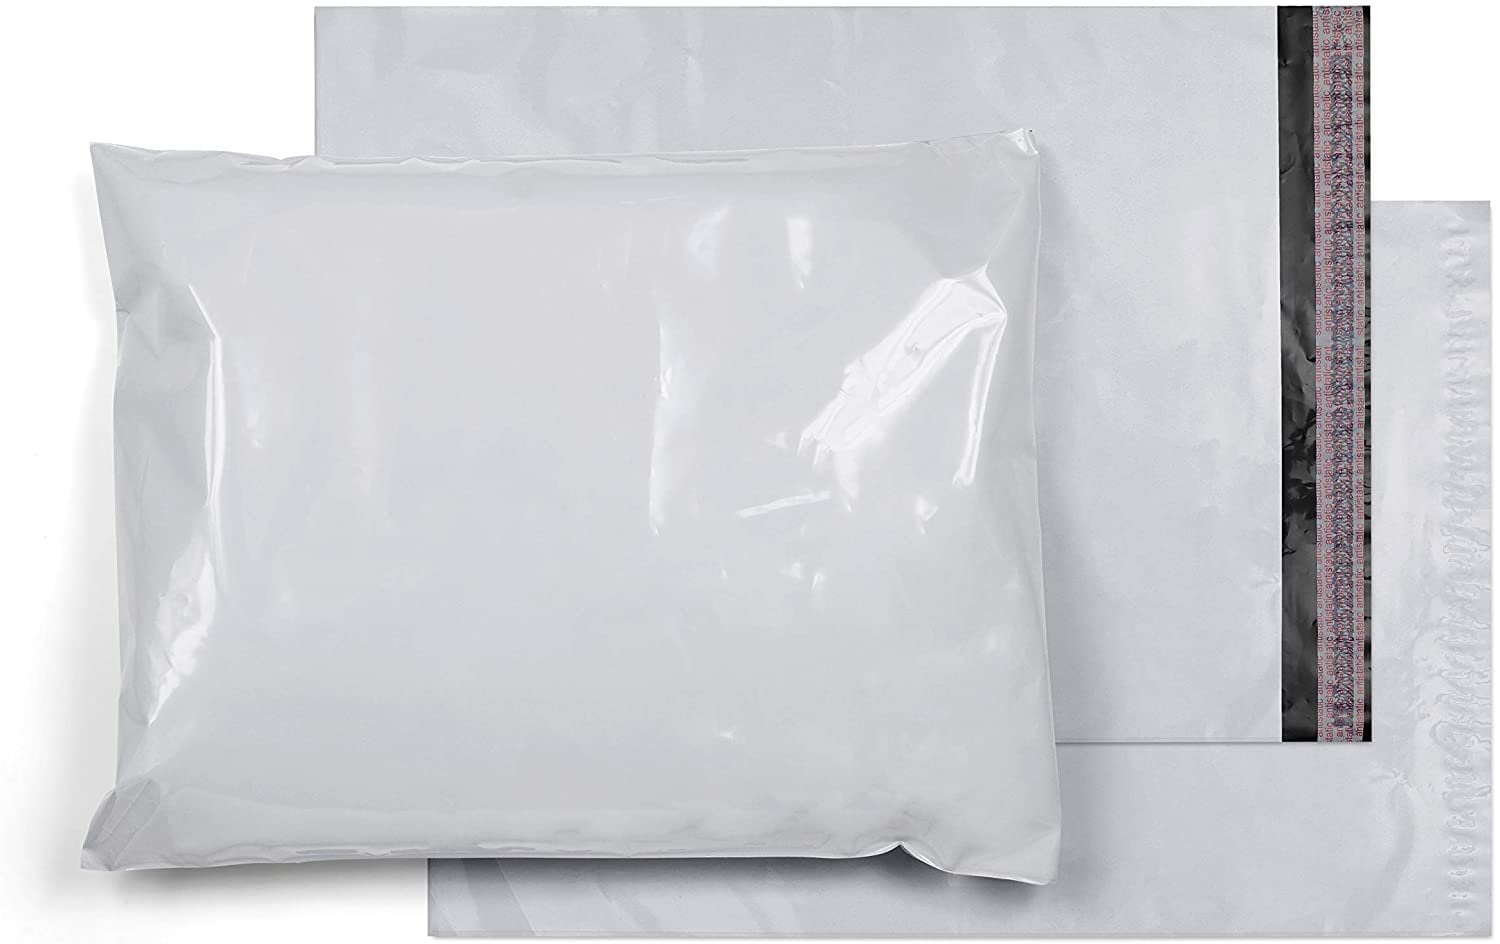 100 7.5x10.5 Poly Bags Plastic Envelopes Mailers Shipping Self Seal 7.5"x10.5" 